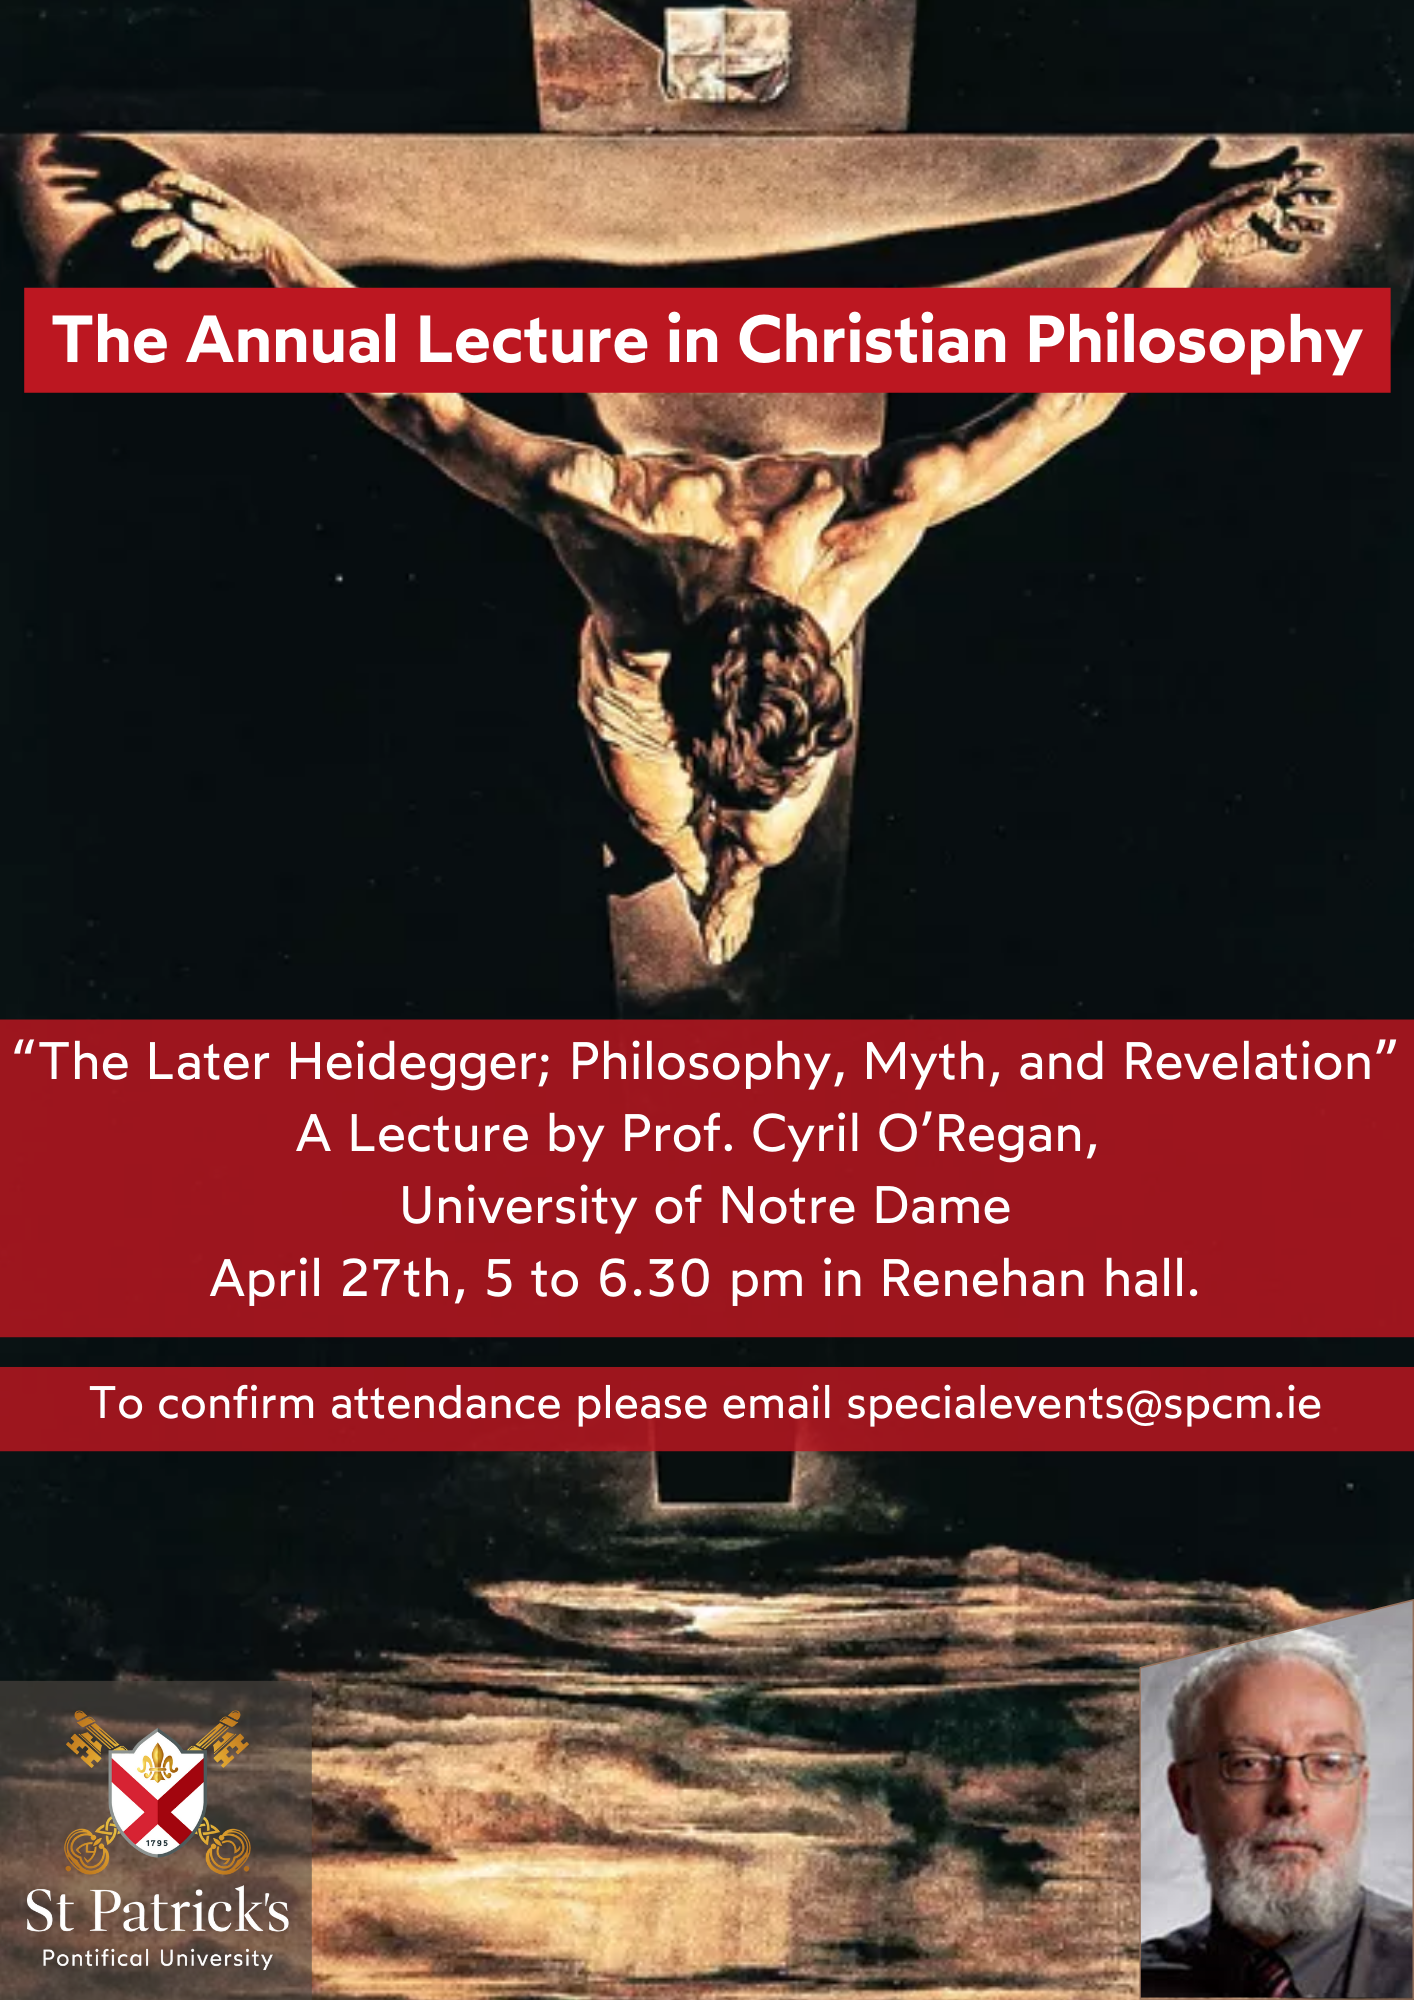 The-Annual-Lecture-in-Christian-Philosophy-5.png#asset:14104